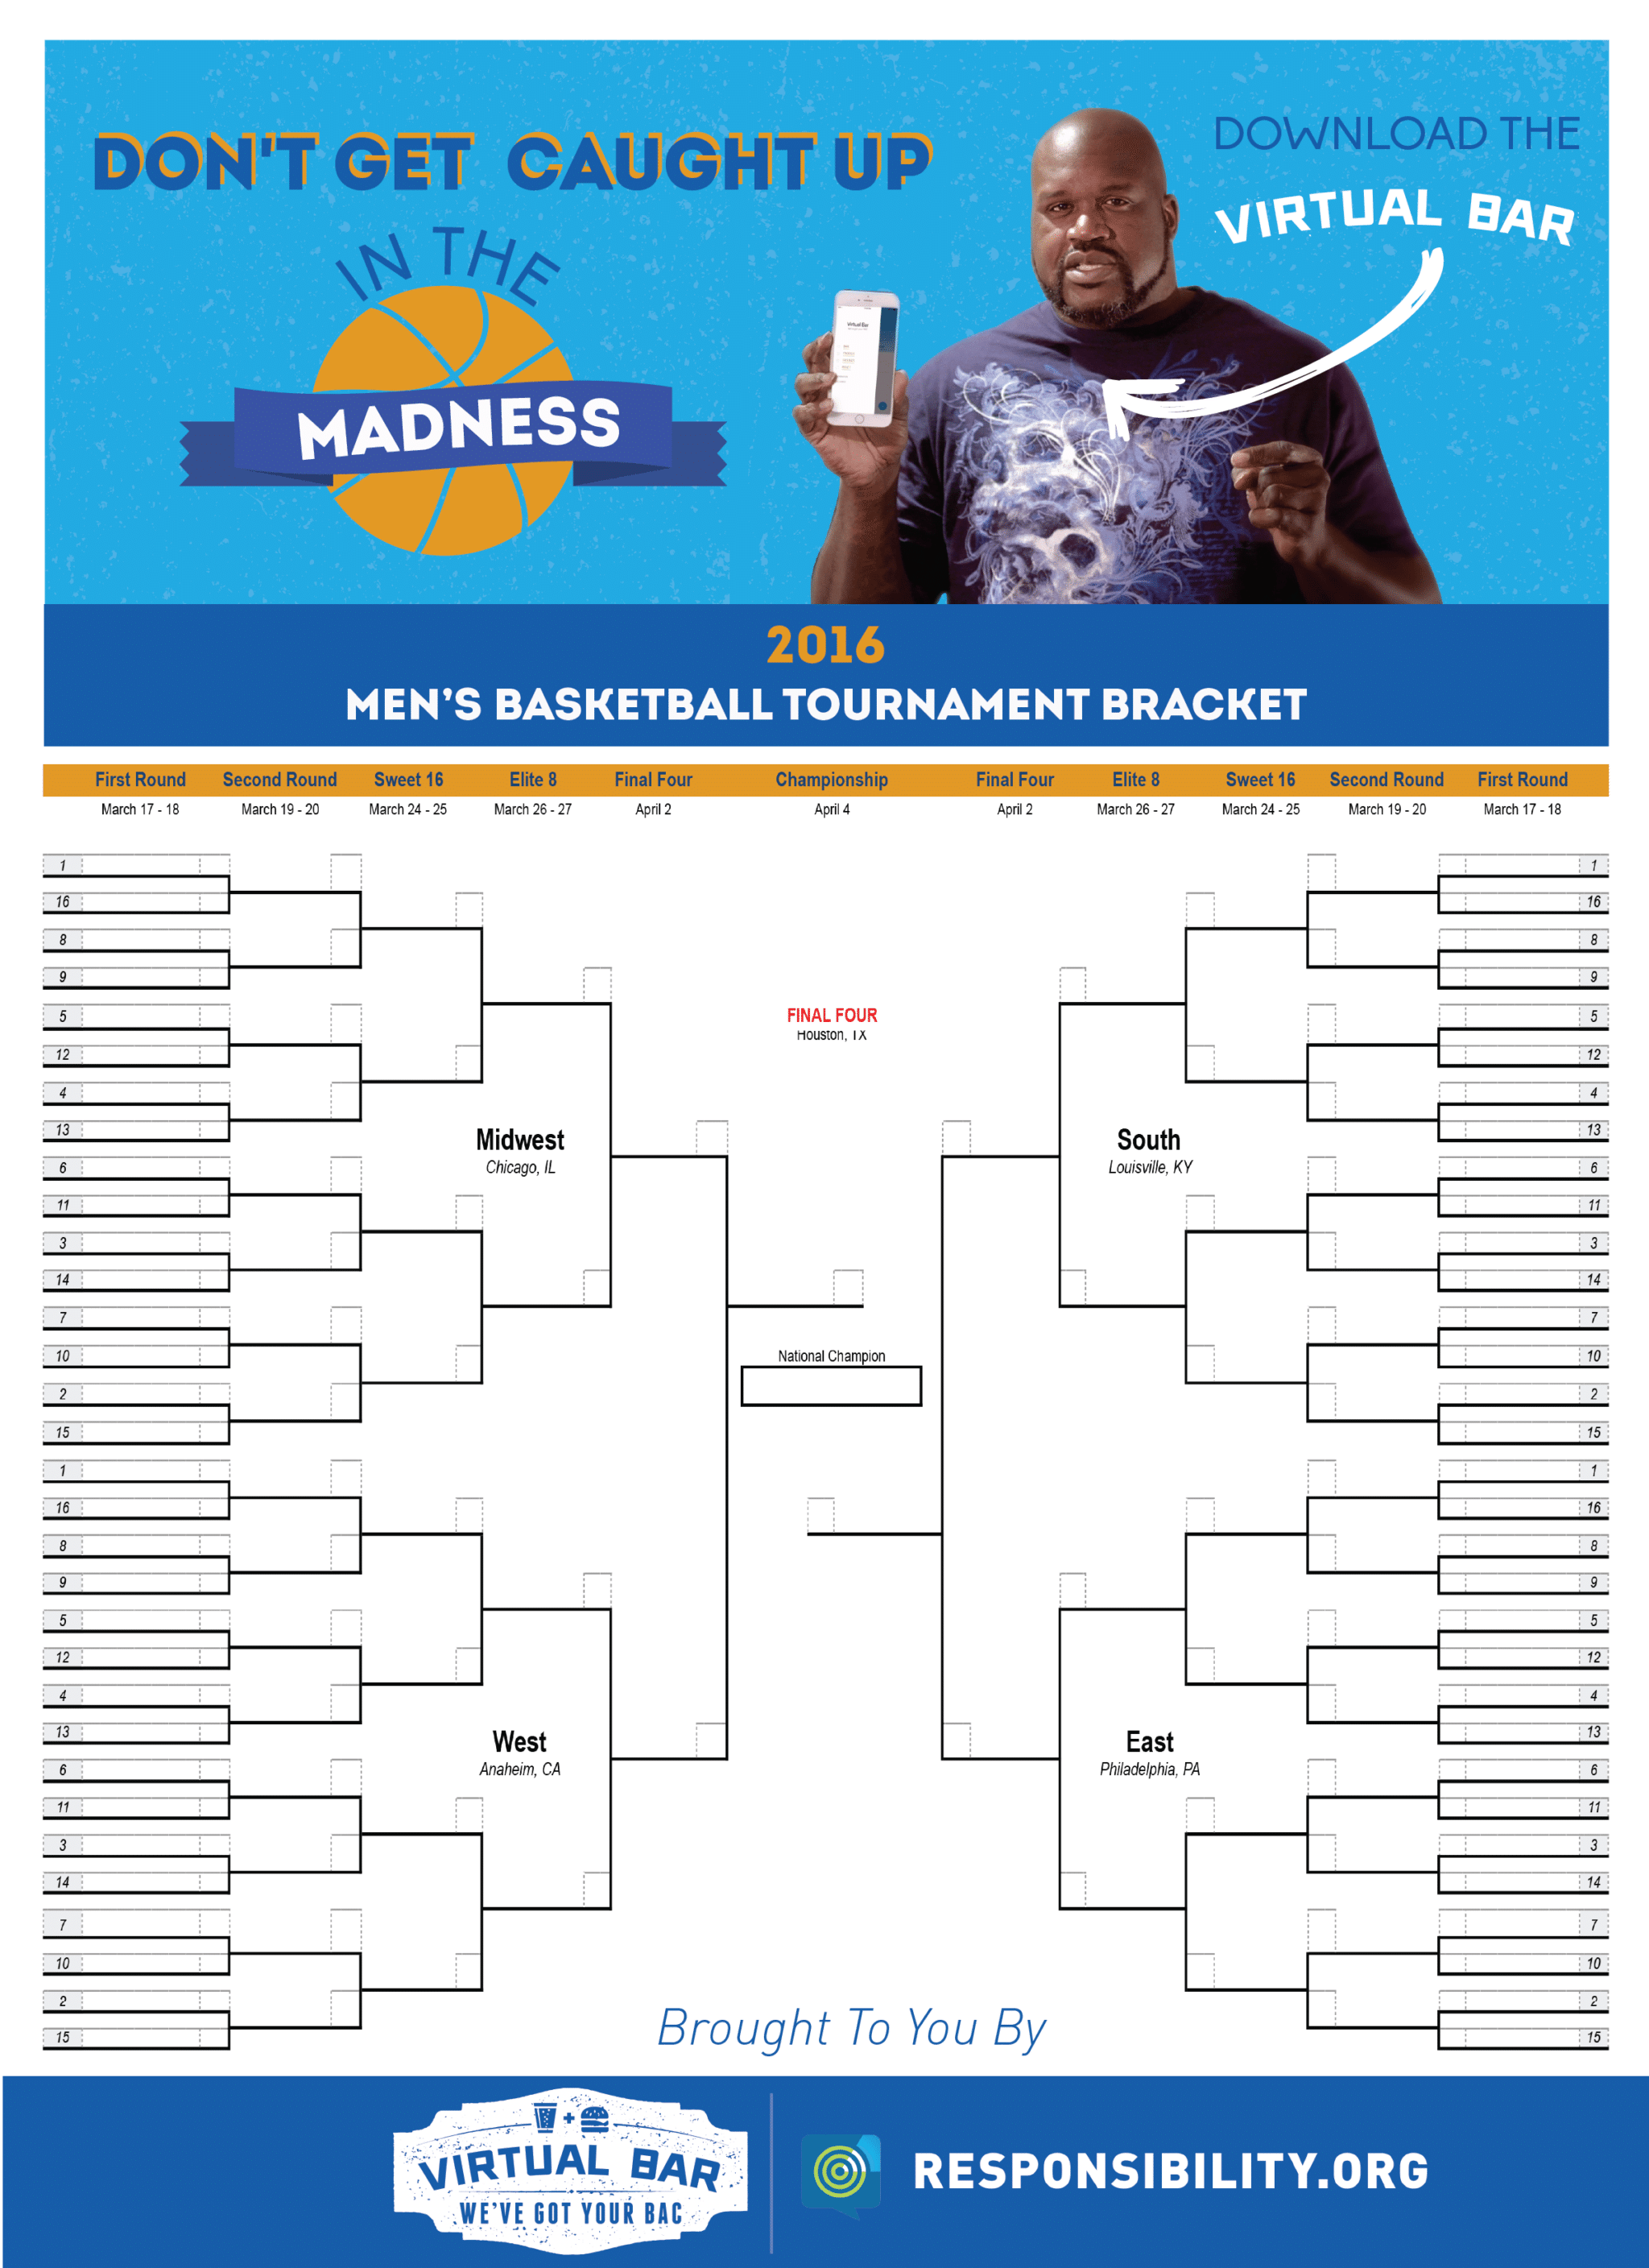 Don't get caught up in the Madness of March -- fill out our Virtual Bar app tournament bracket and download the Virtual Bar mobile app today.